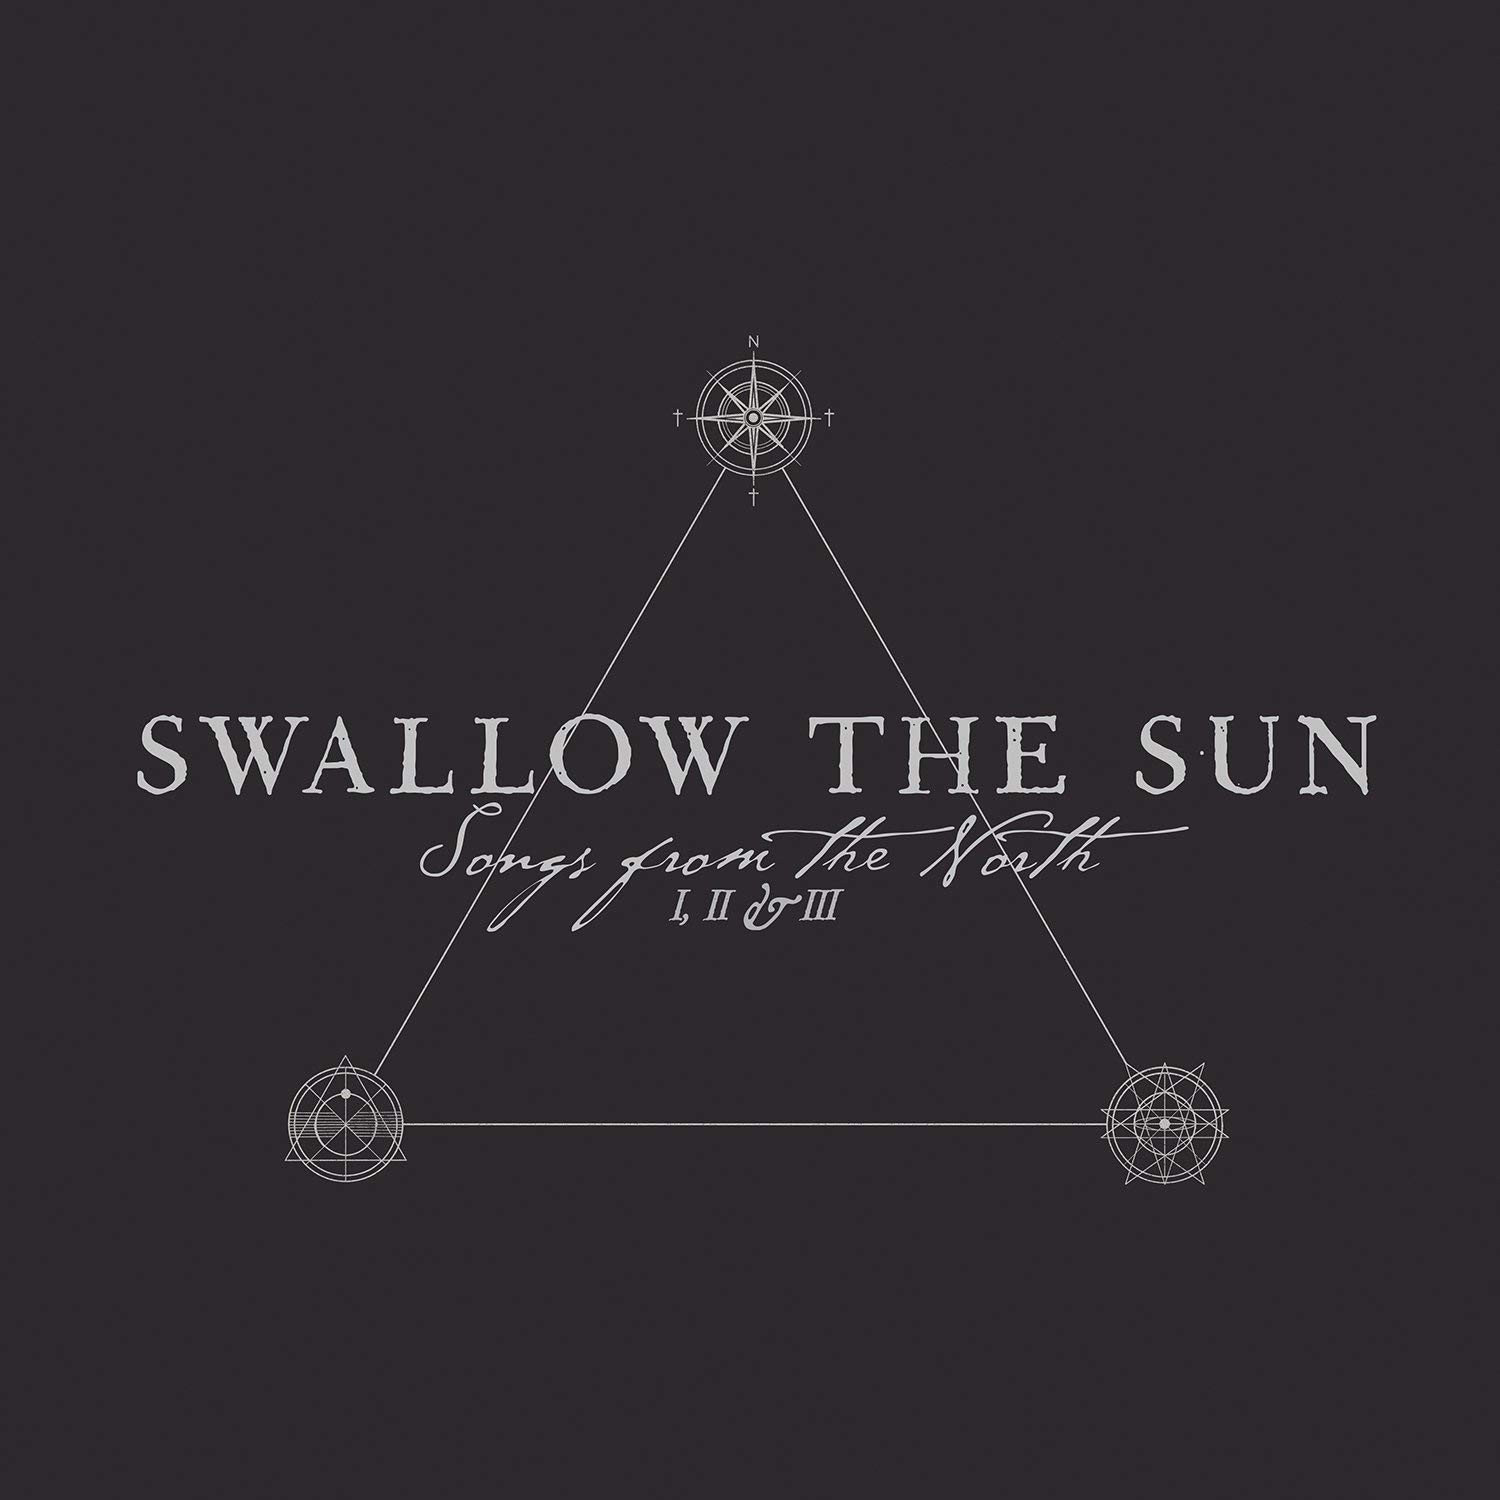 LP platňa Swallow The Sun Songs From the North I, II & III (5 LP)